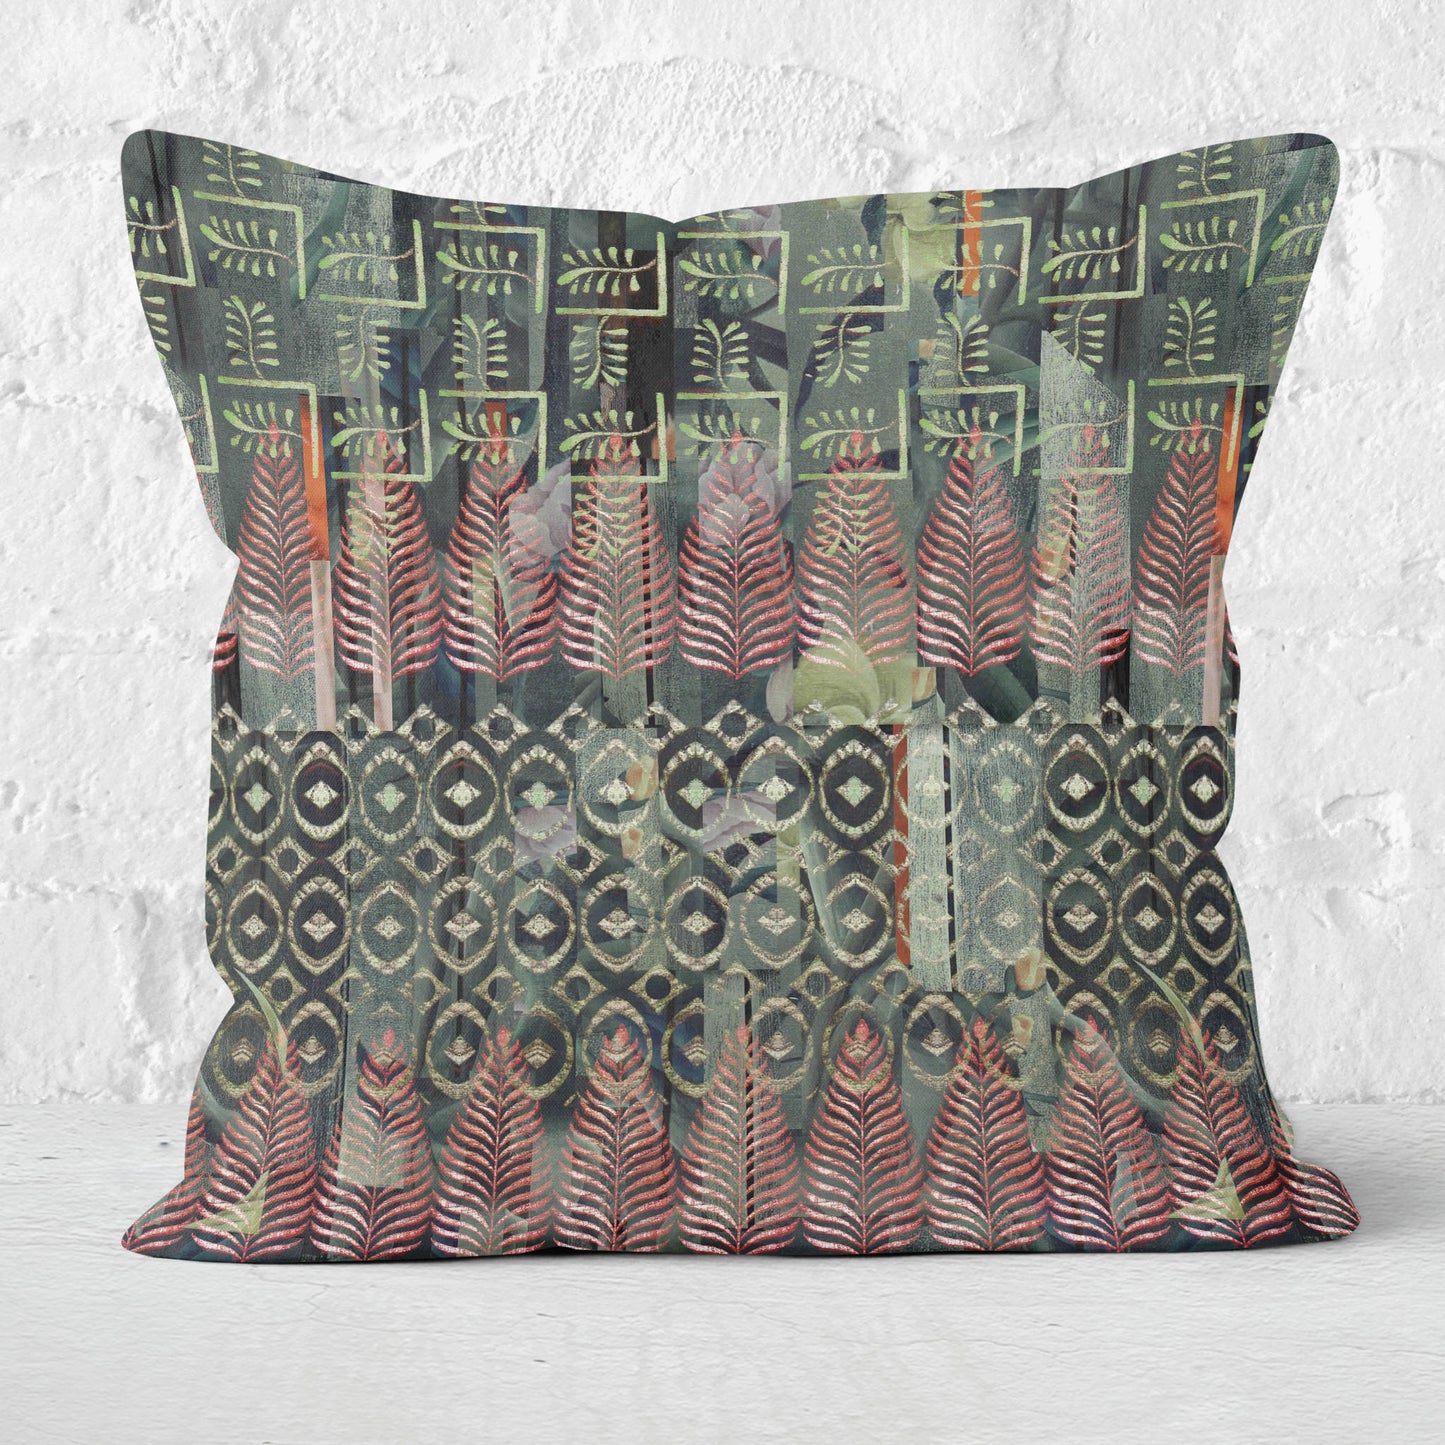 Square throw pillow featuring a green and red Indian block print pattern, set in front of a white brick wall